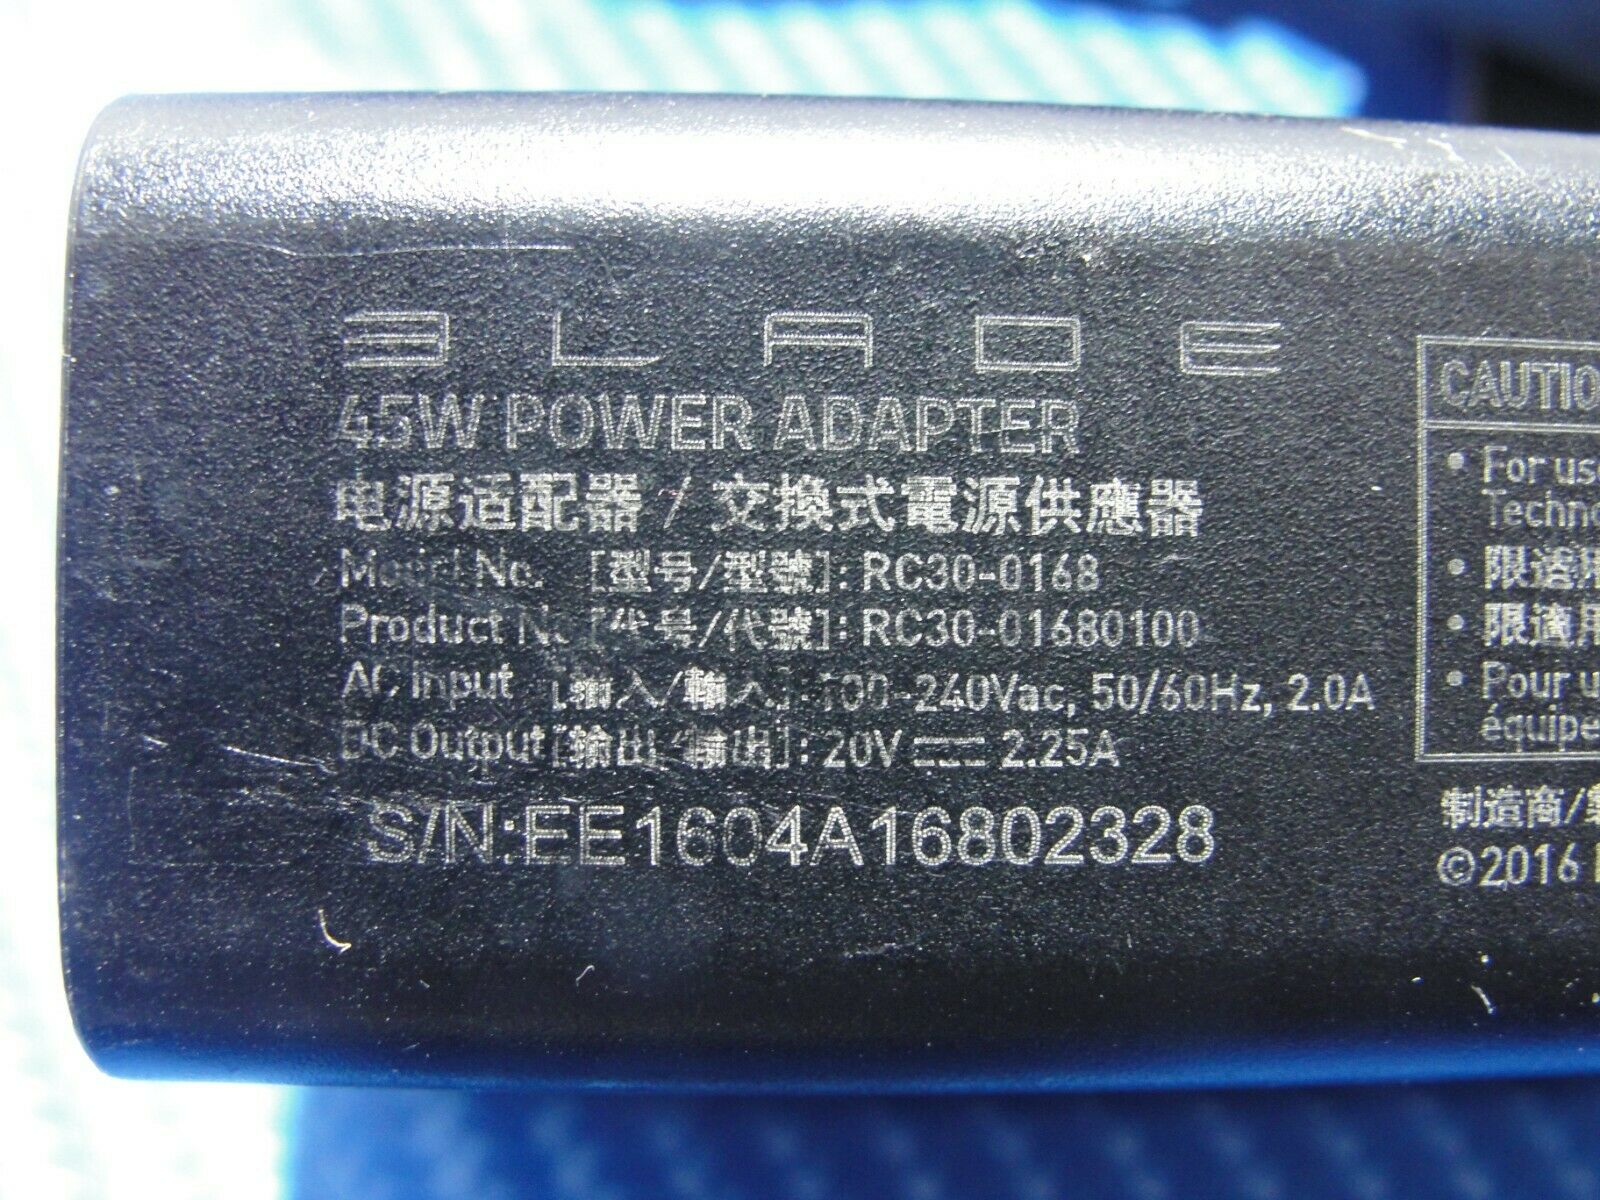 Genuine Alienware AC Adapter Power Charger 20V 2.25A 45W 1604A16802328 - Laptop Parts - Buy Authentic Computer Parts - Top Seller Ebay